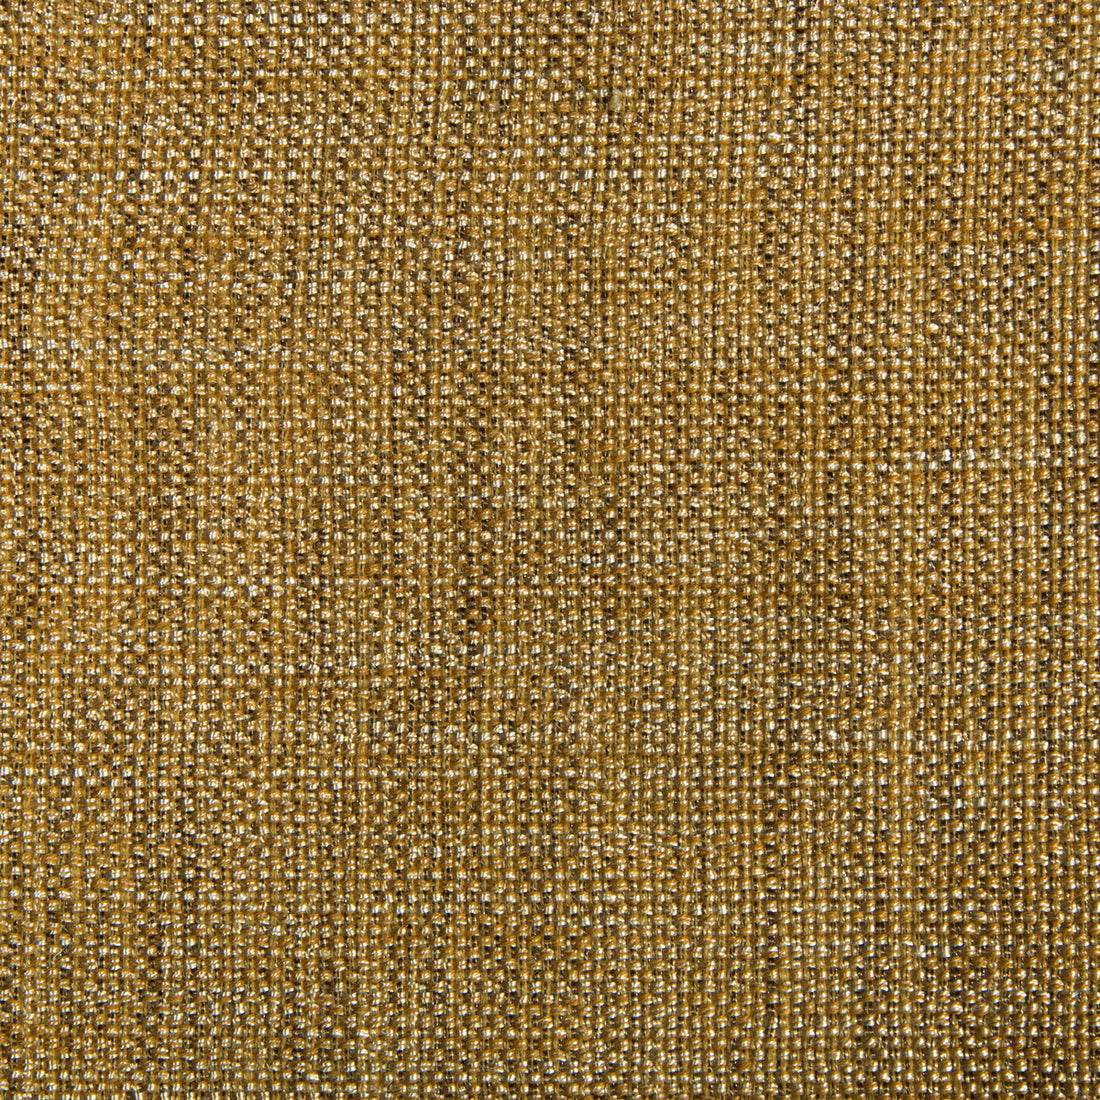 Kravet Contract fabric in 34926-404 color - pattern 34926.404.0 - by Kravet Contract